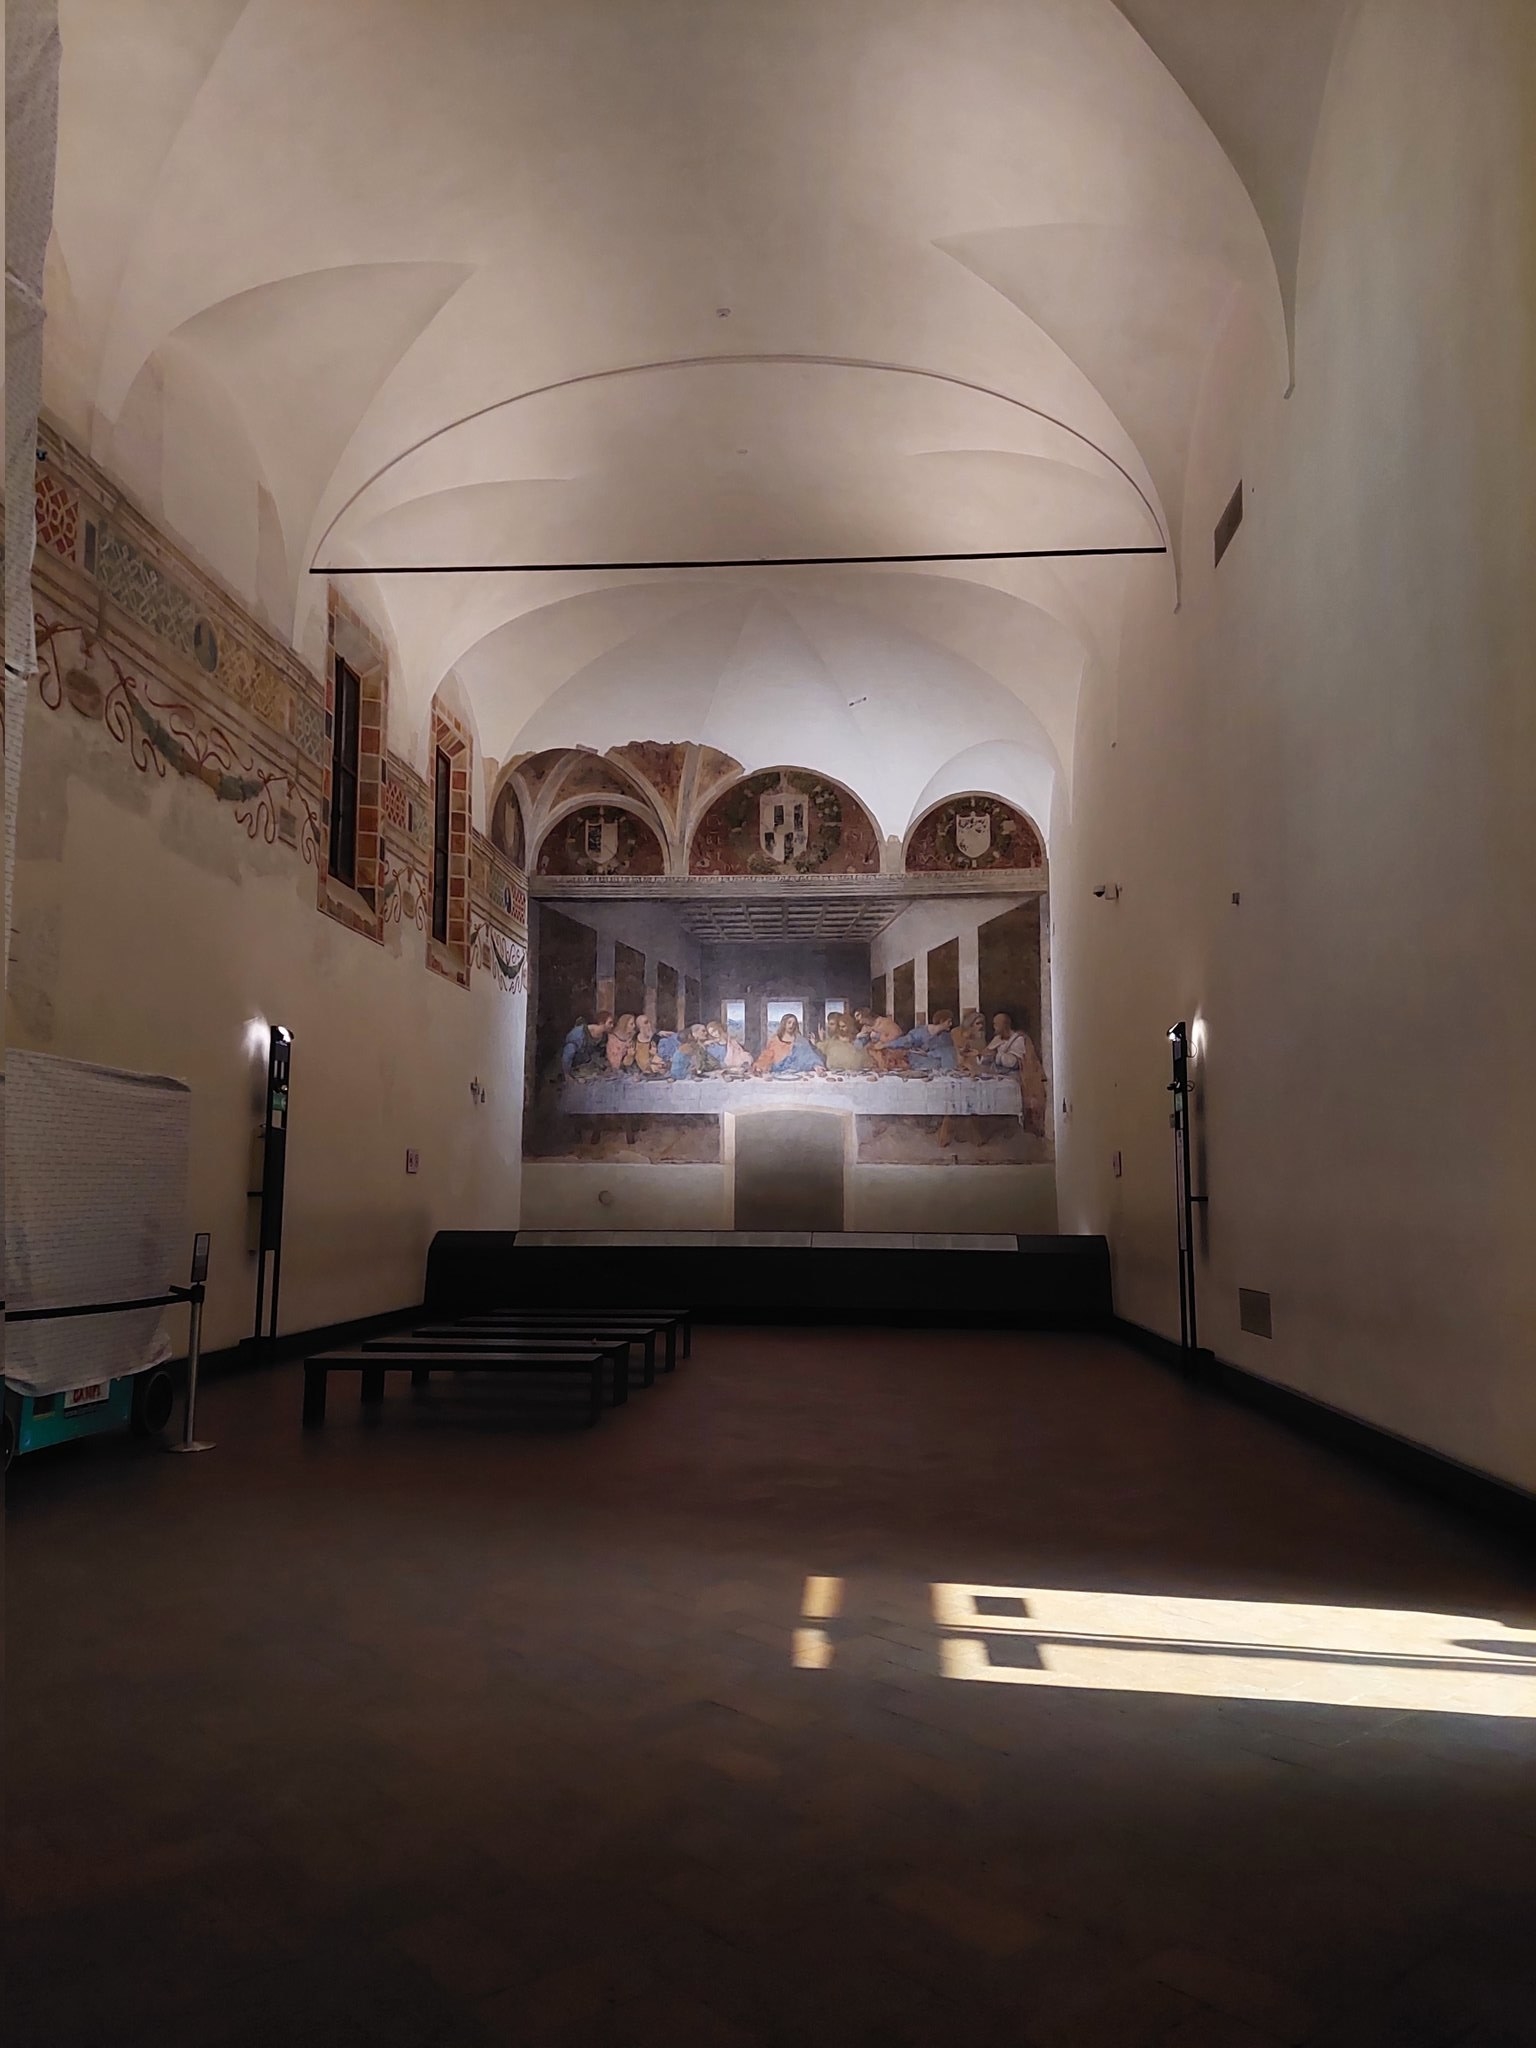 A medium-size painting inside the refectory of a small convent, with two small lights illuminating it